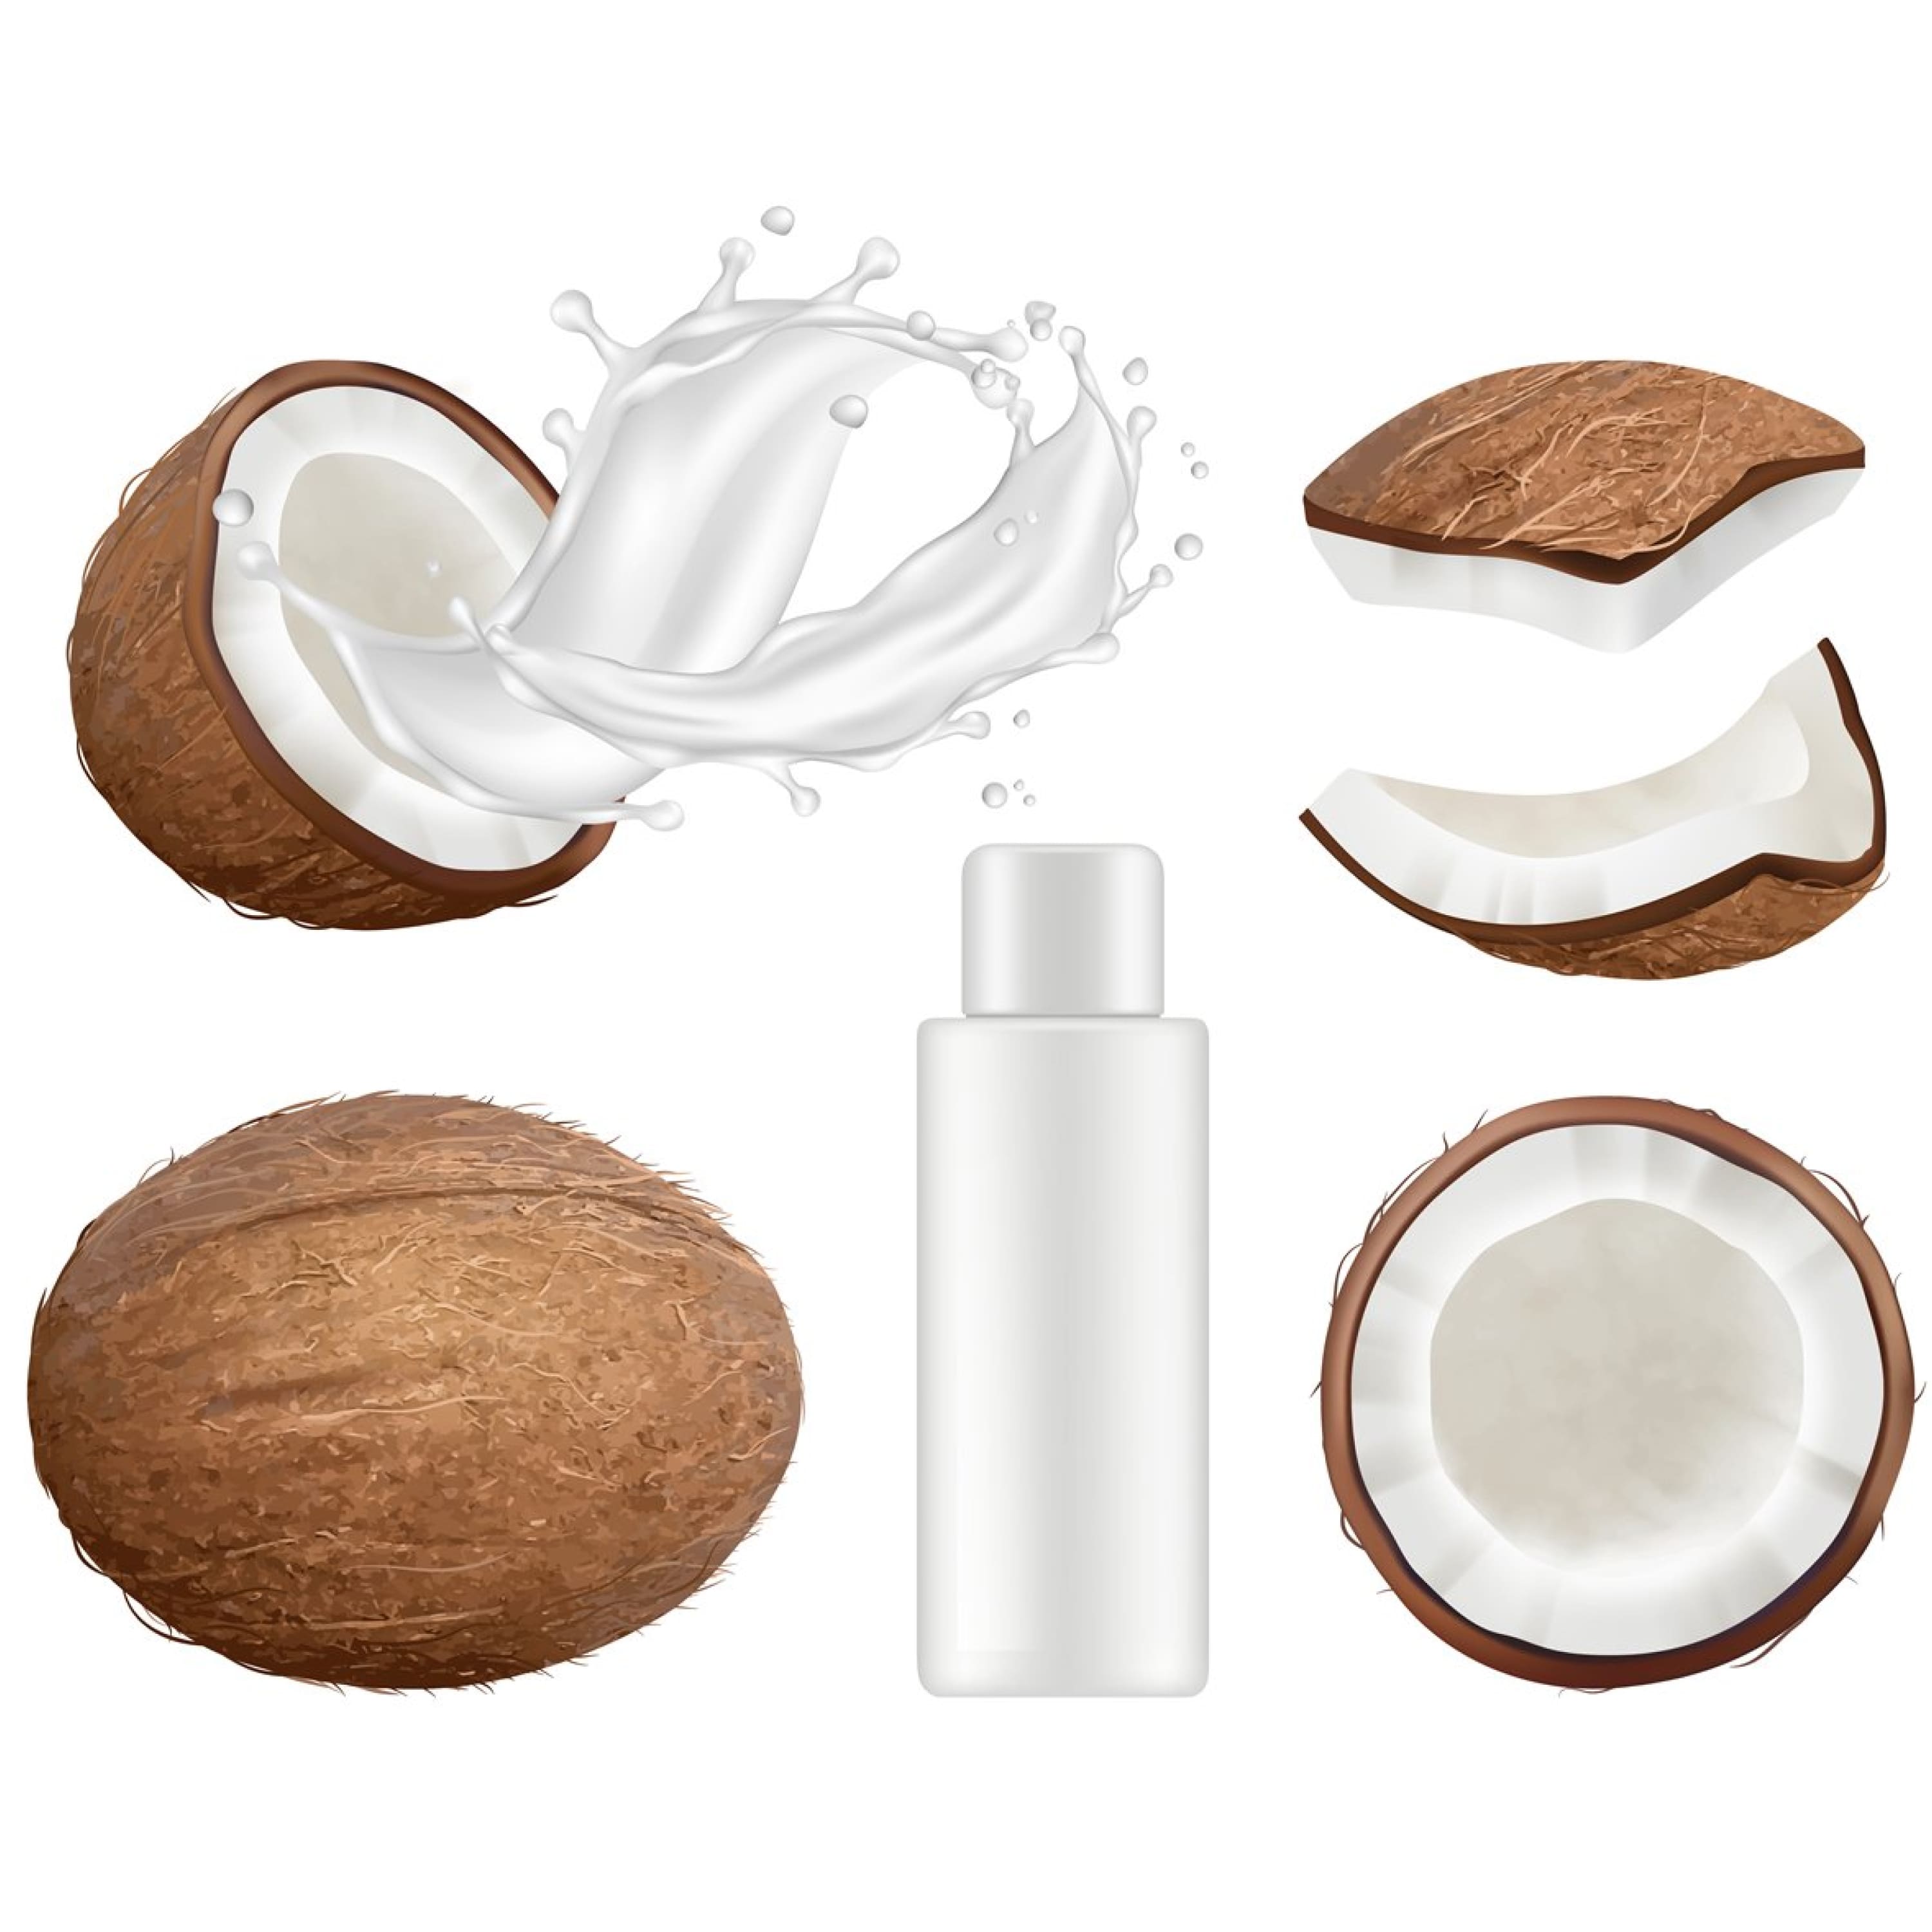 Coconut collection. Fresh tropical coco fruit with milk vect cover.